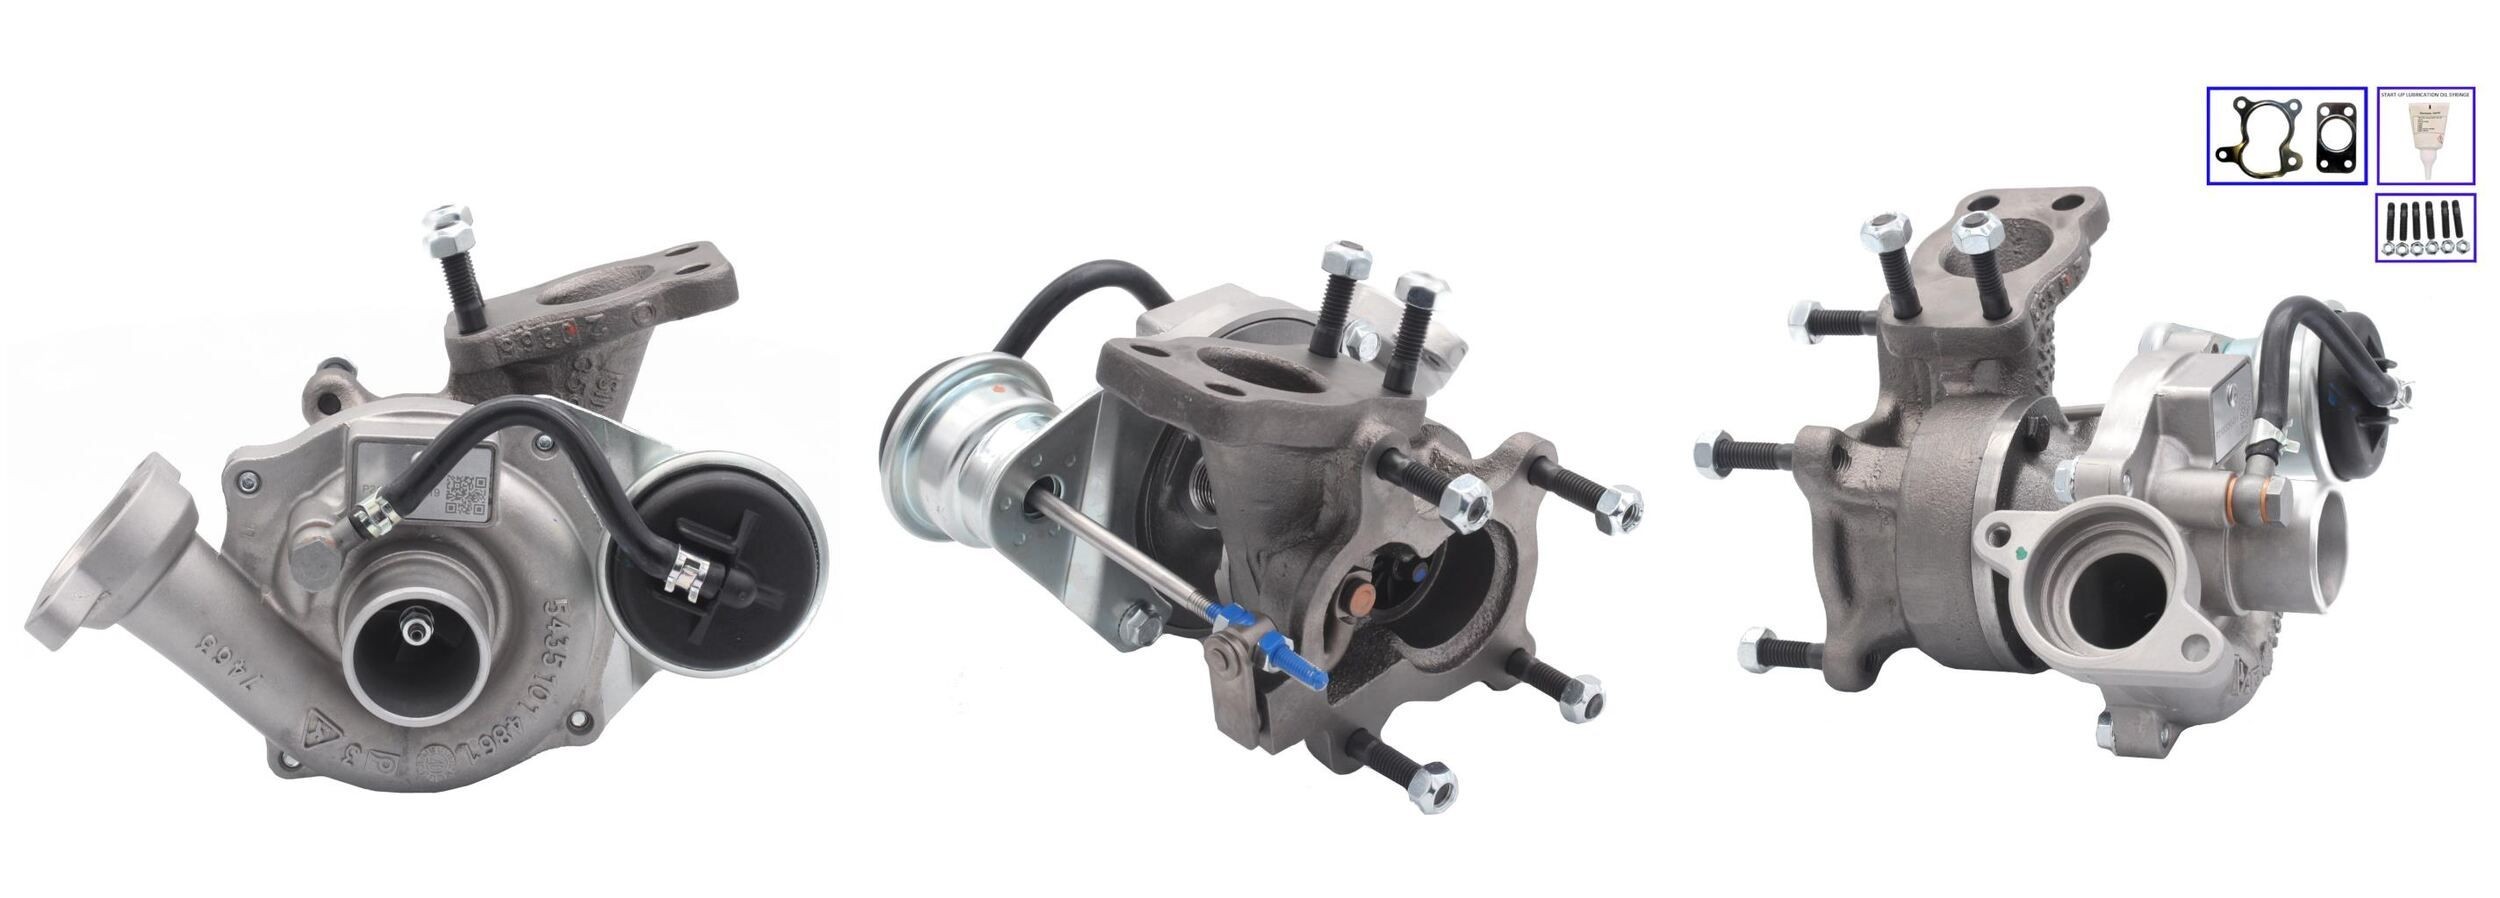 Turbocharger LUCAS Exhaust Turbocharger, Pneumatically controlled actuator, with gaskets/seals - LTRPA54359880009